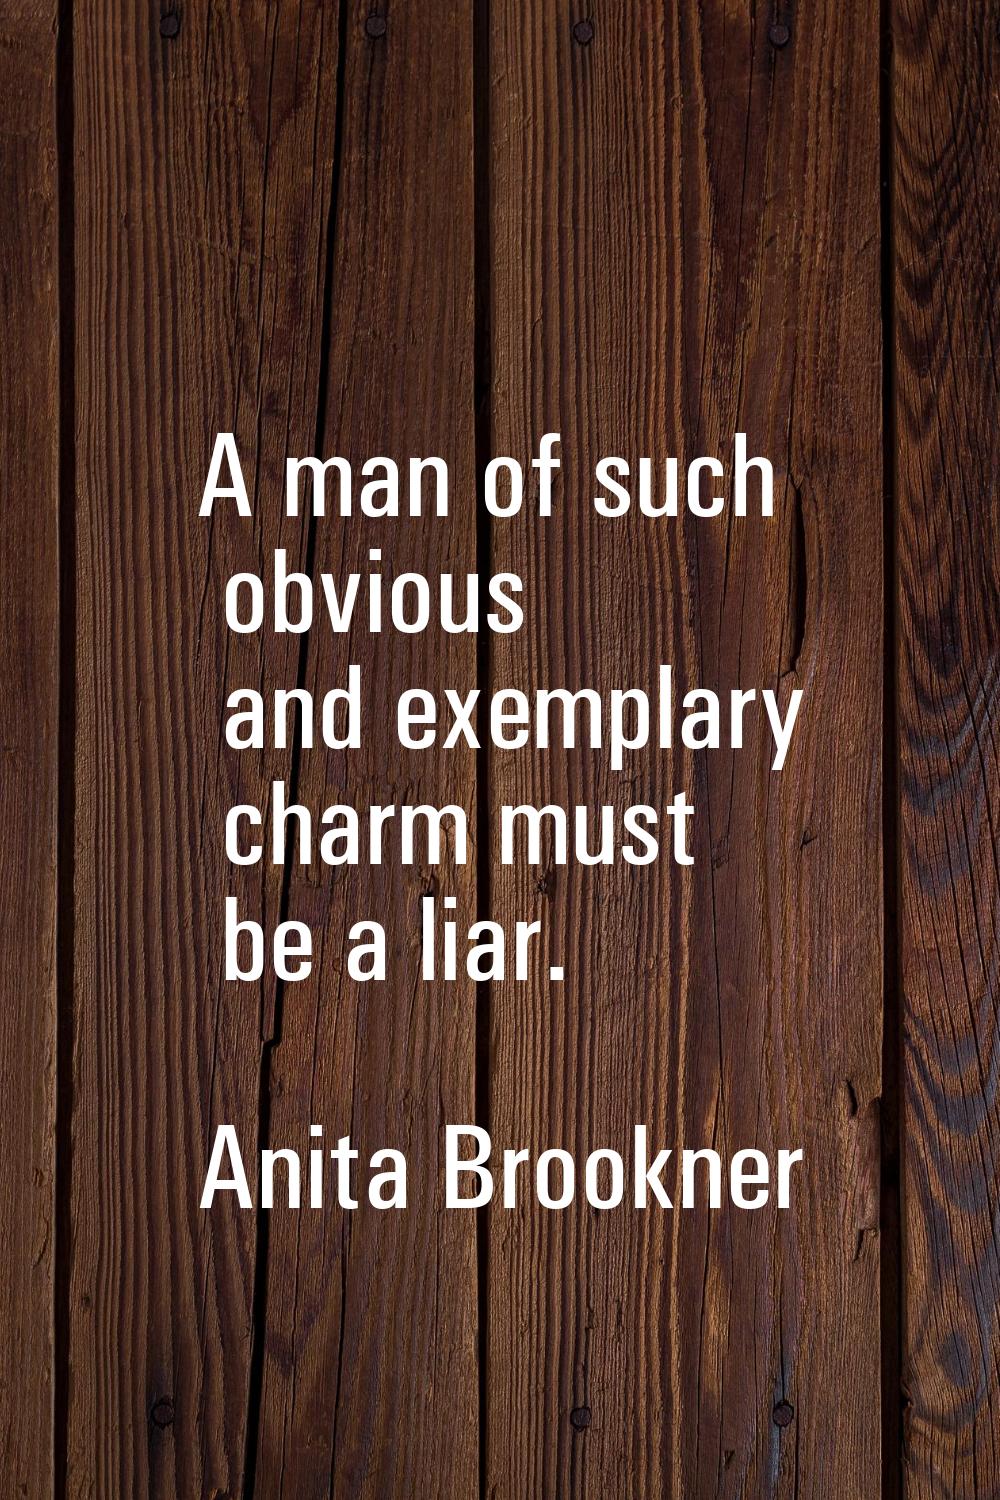 A man of such obvious and exemplary charm must be a liar.